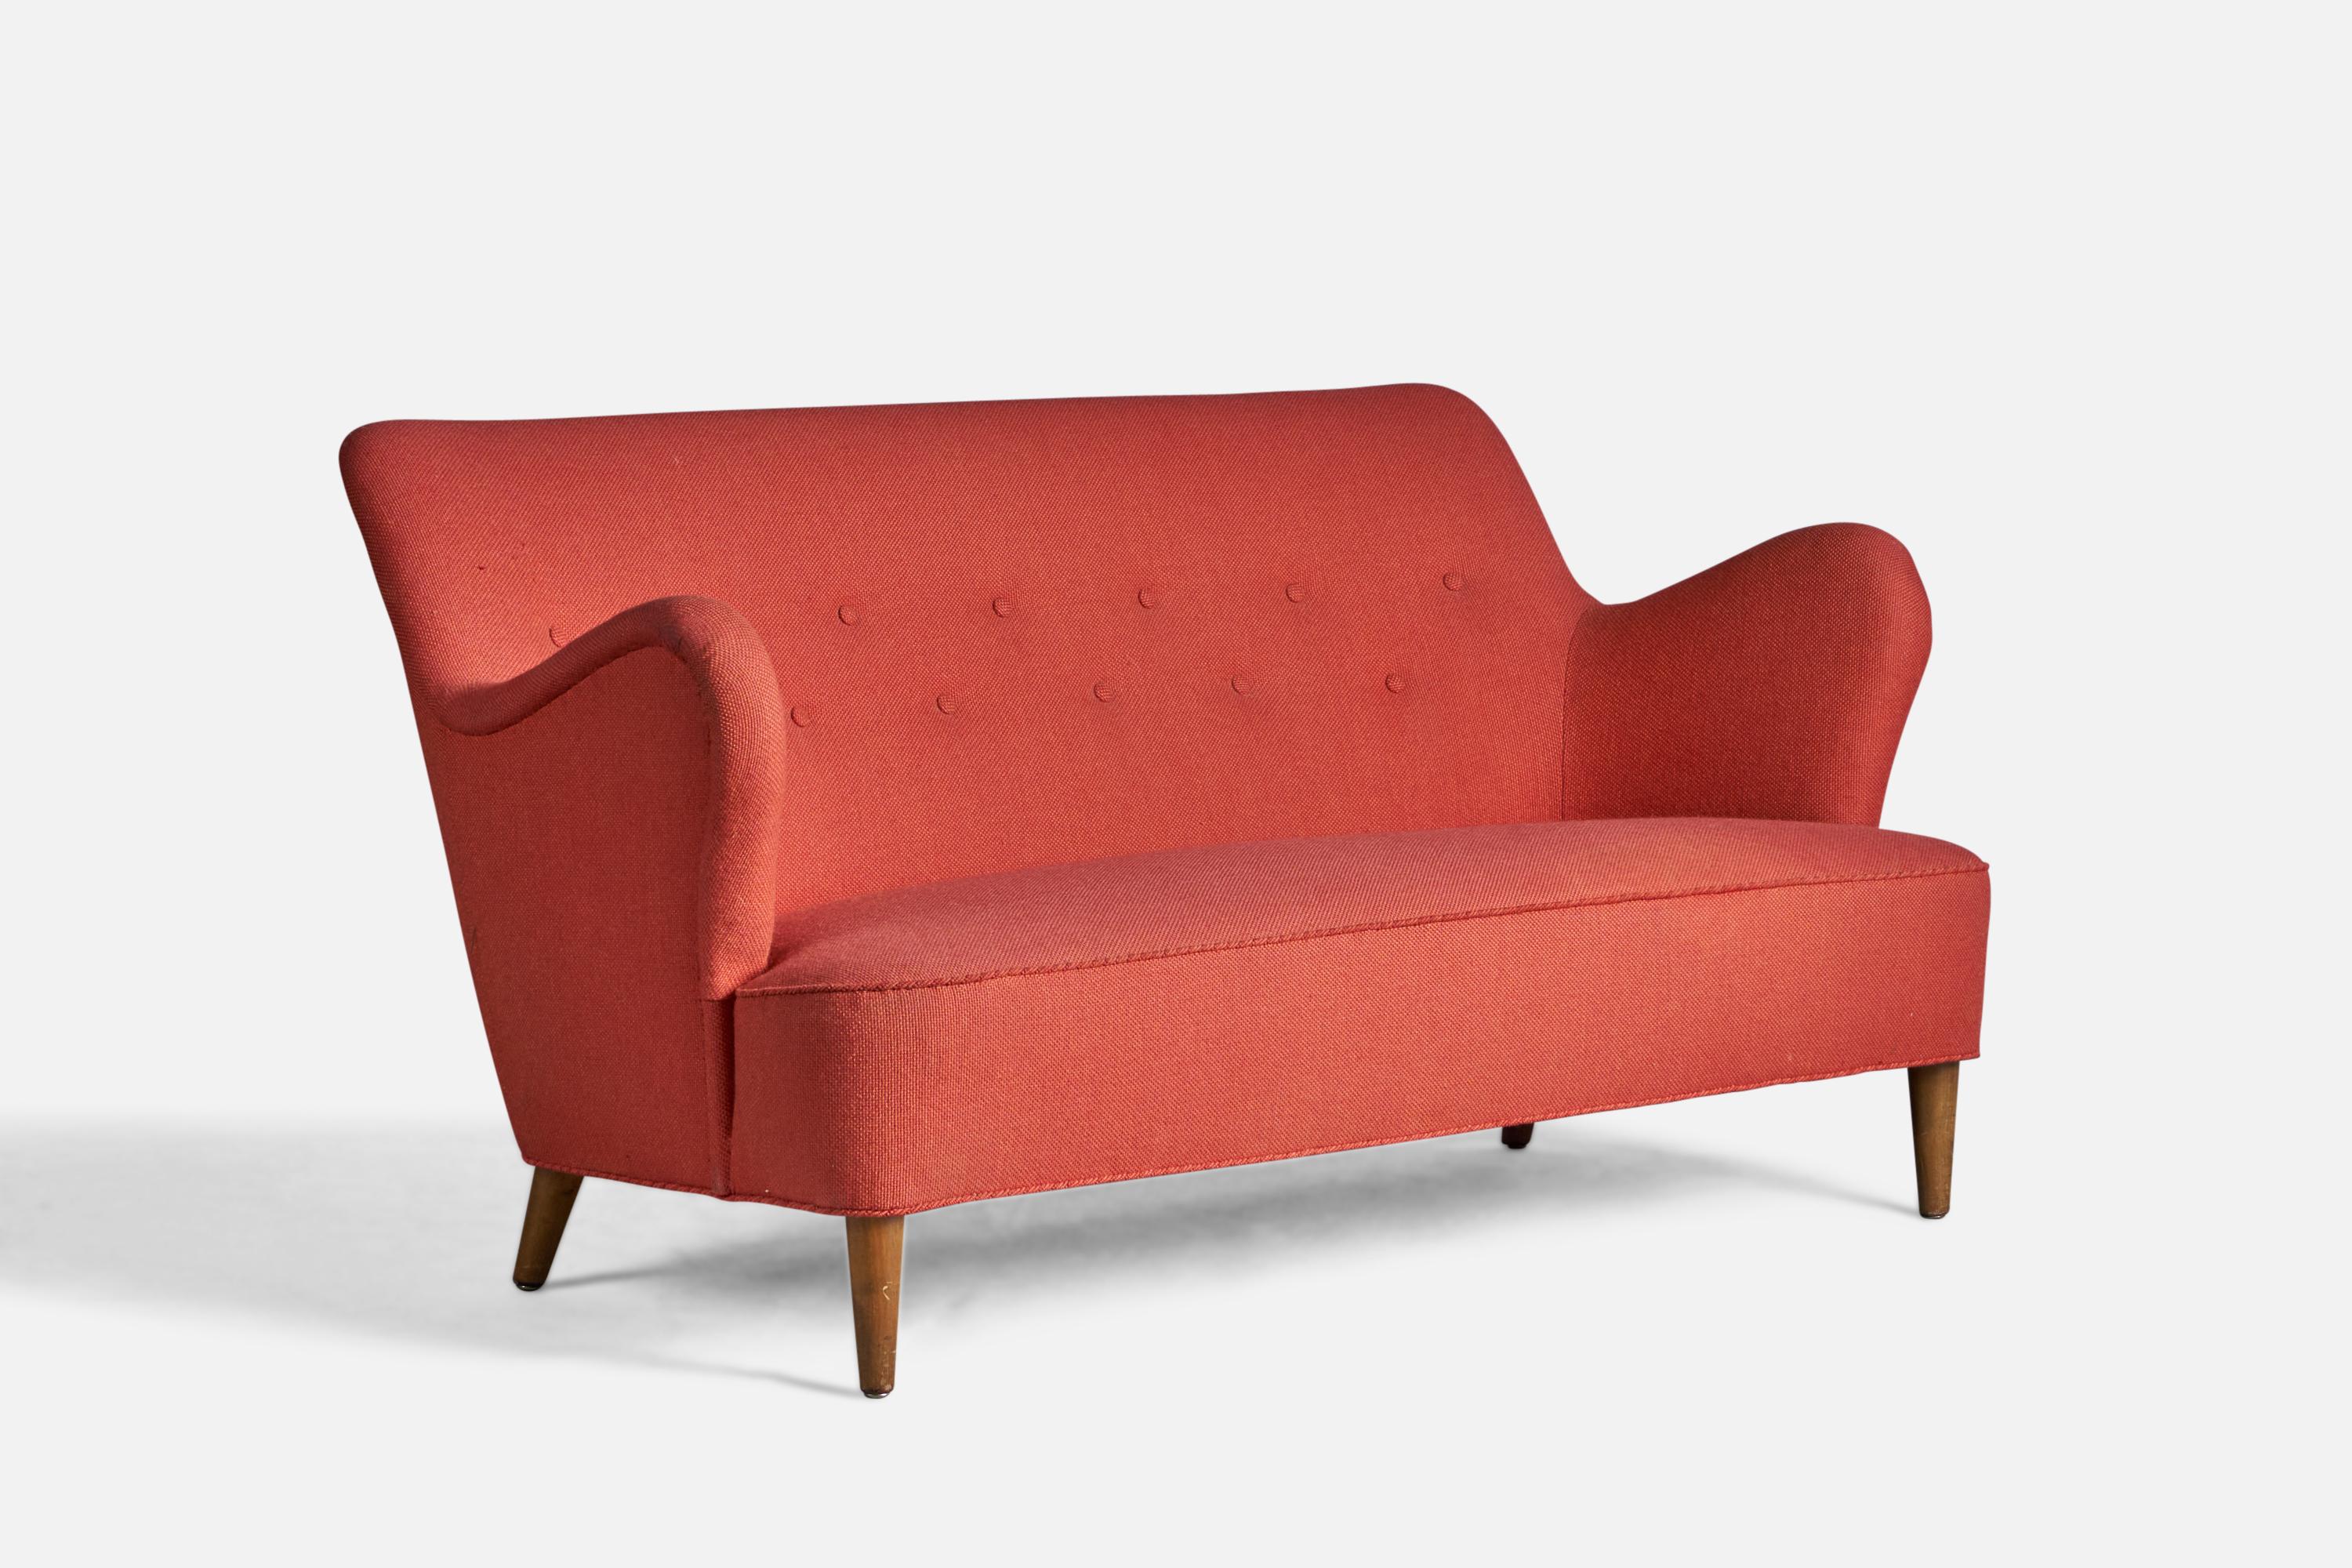 An organic wood and red fabric sofa, designed and produced in Denmark, 1940s.

15